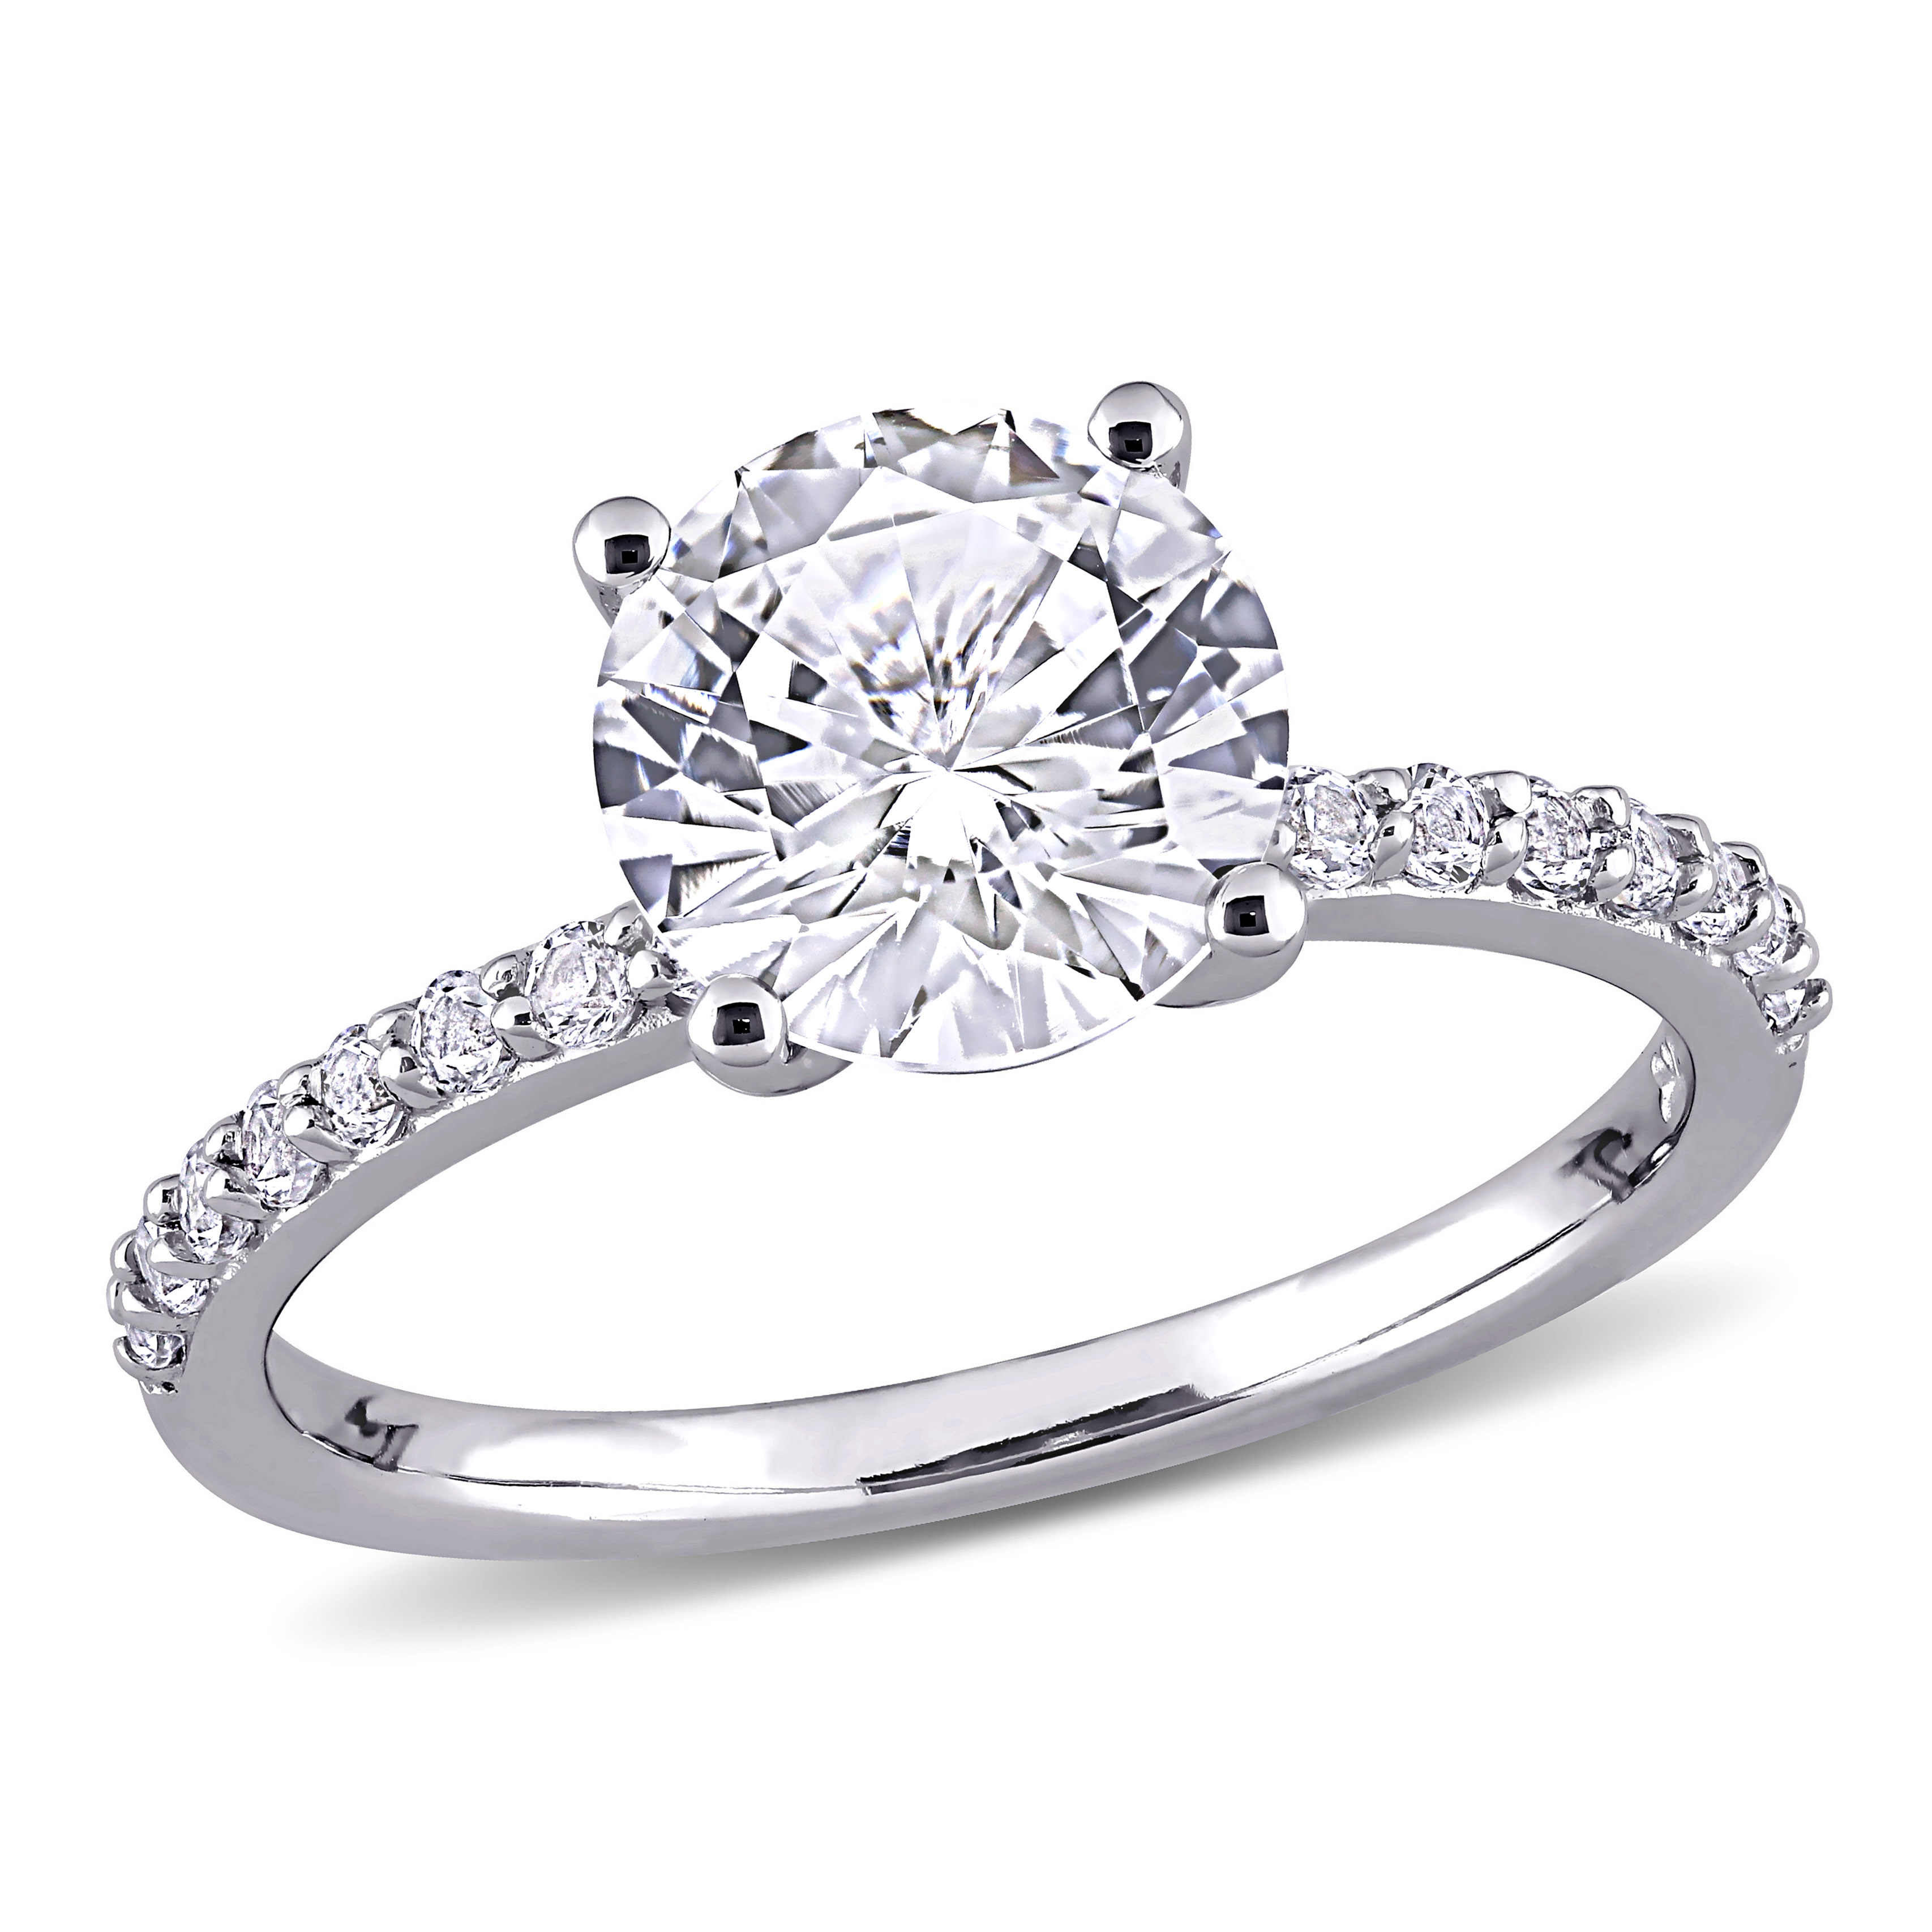 2 3/4 CT TGW Created White Sapphire Solitaire Ring in 10k White Gold